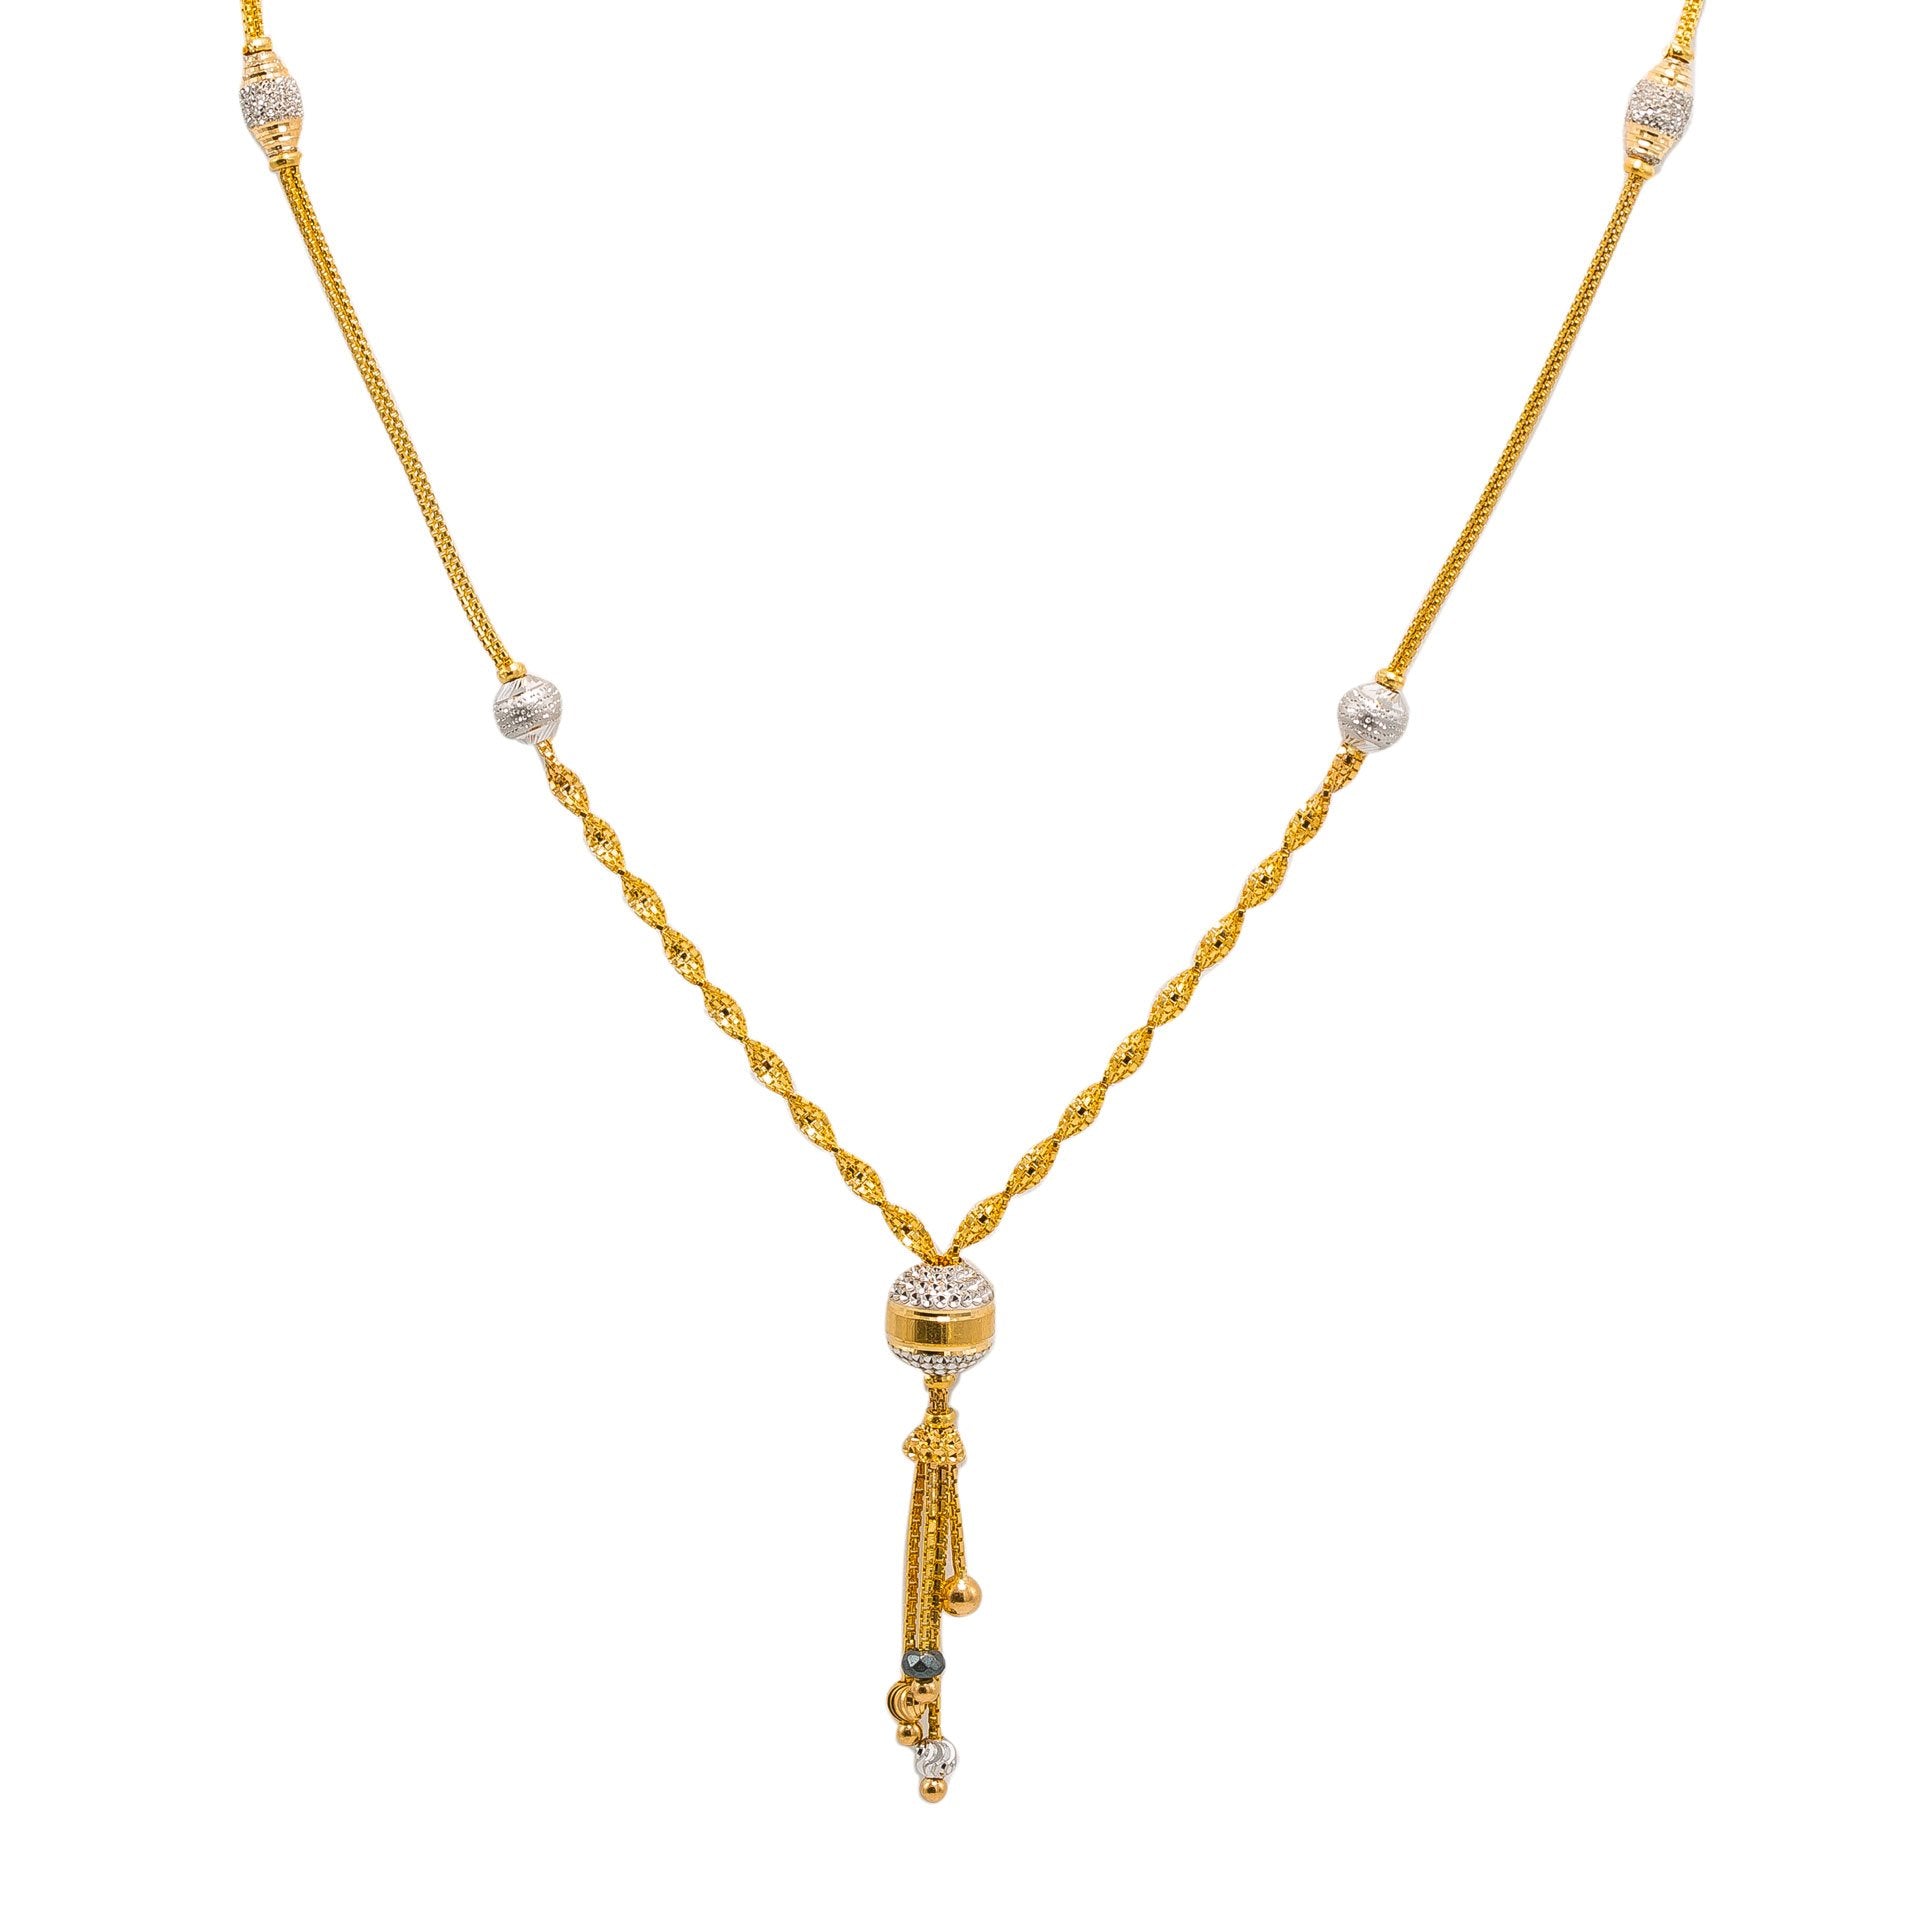 235-GN4245 - 22K Gold Necklace For Women